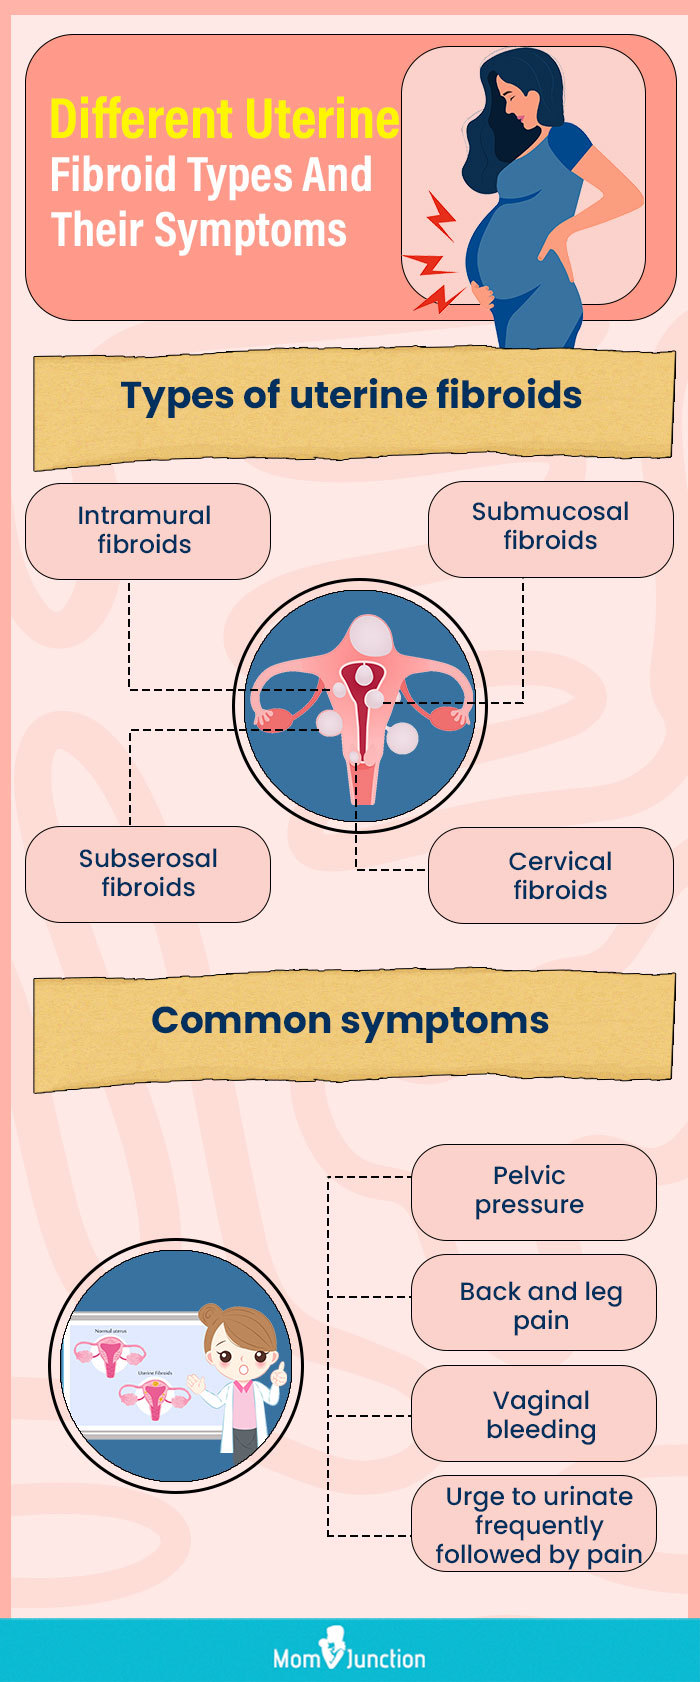 different uterine fibroid types and their symptoms (infographic)